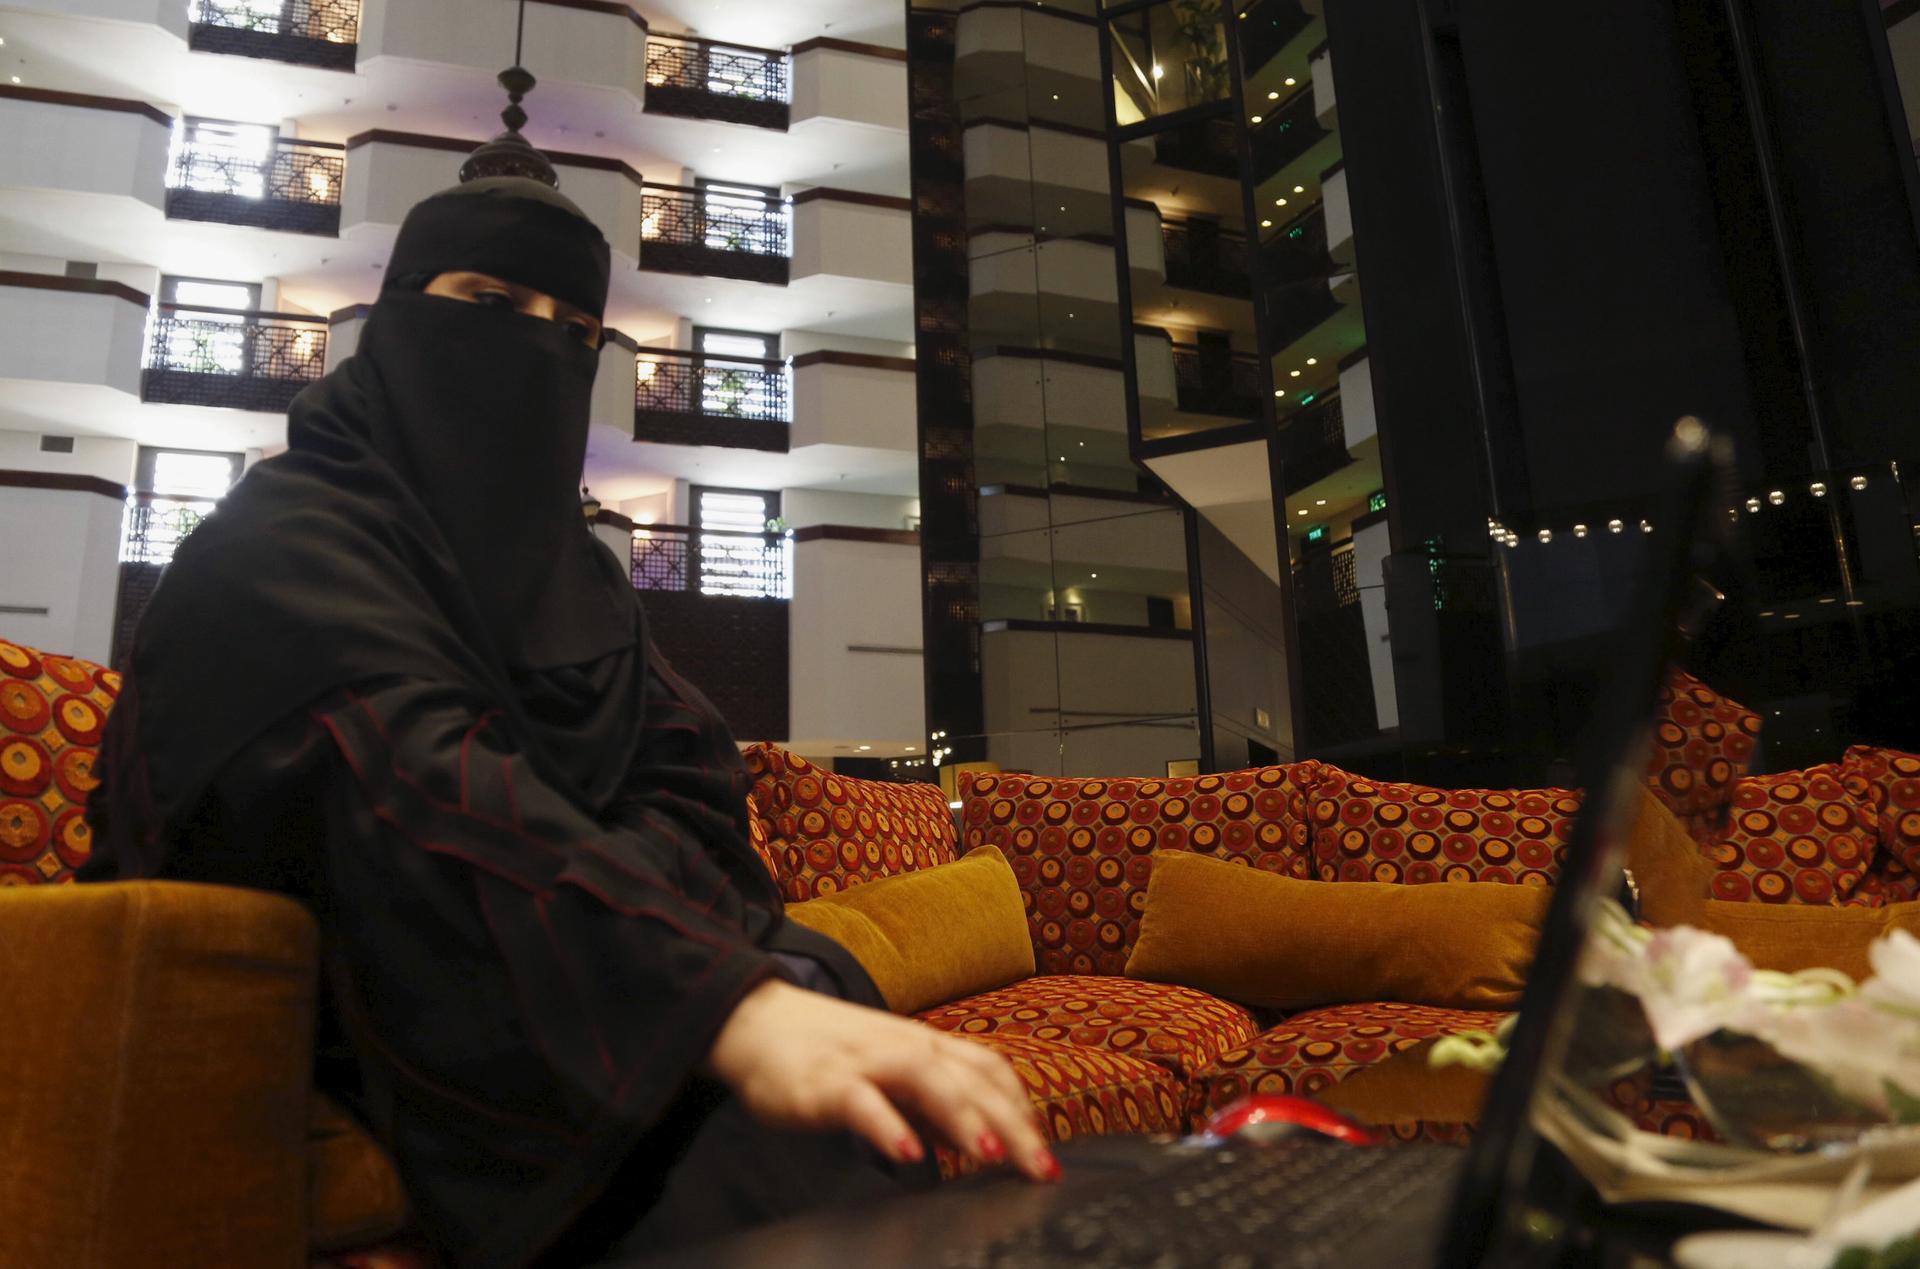 Saudi woman Fawzia al-Harbi, a candidate for local municipal council elections, uses her laptop at a shopping mall in Riyadh November 29, 2015.